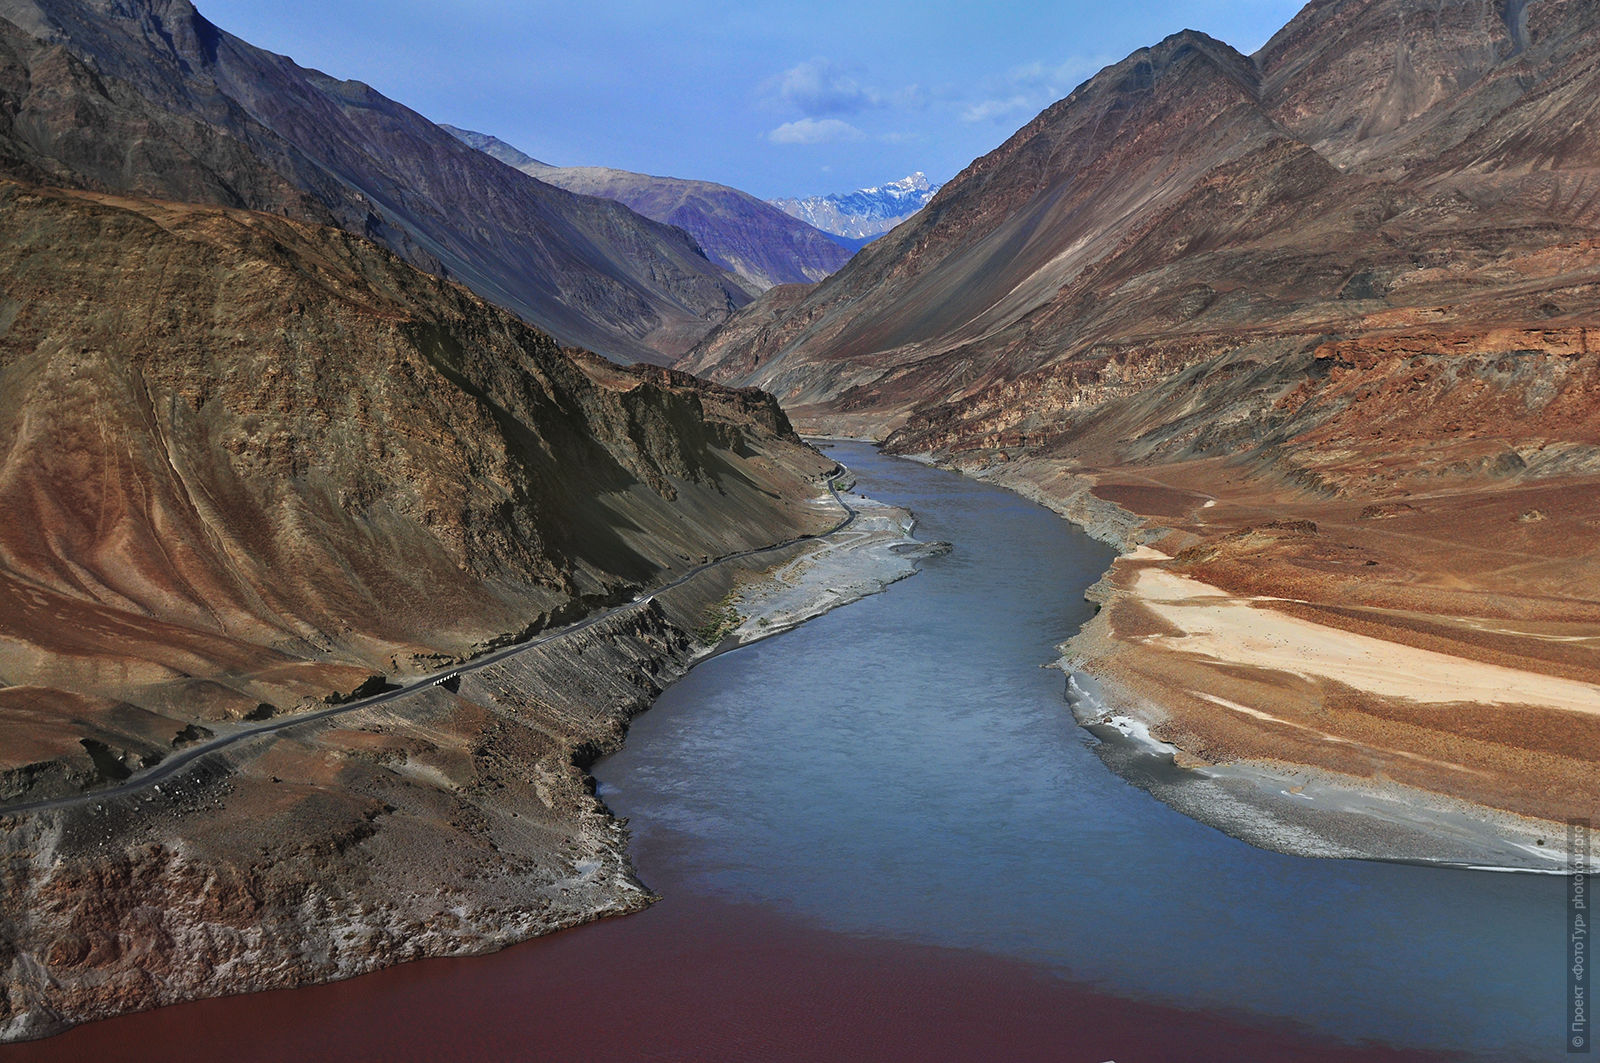 The confluence of the Indus and Zanskar rivers, Ladakh womens tour, August 31 - September 14, 2019.